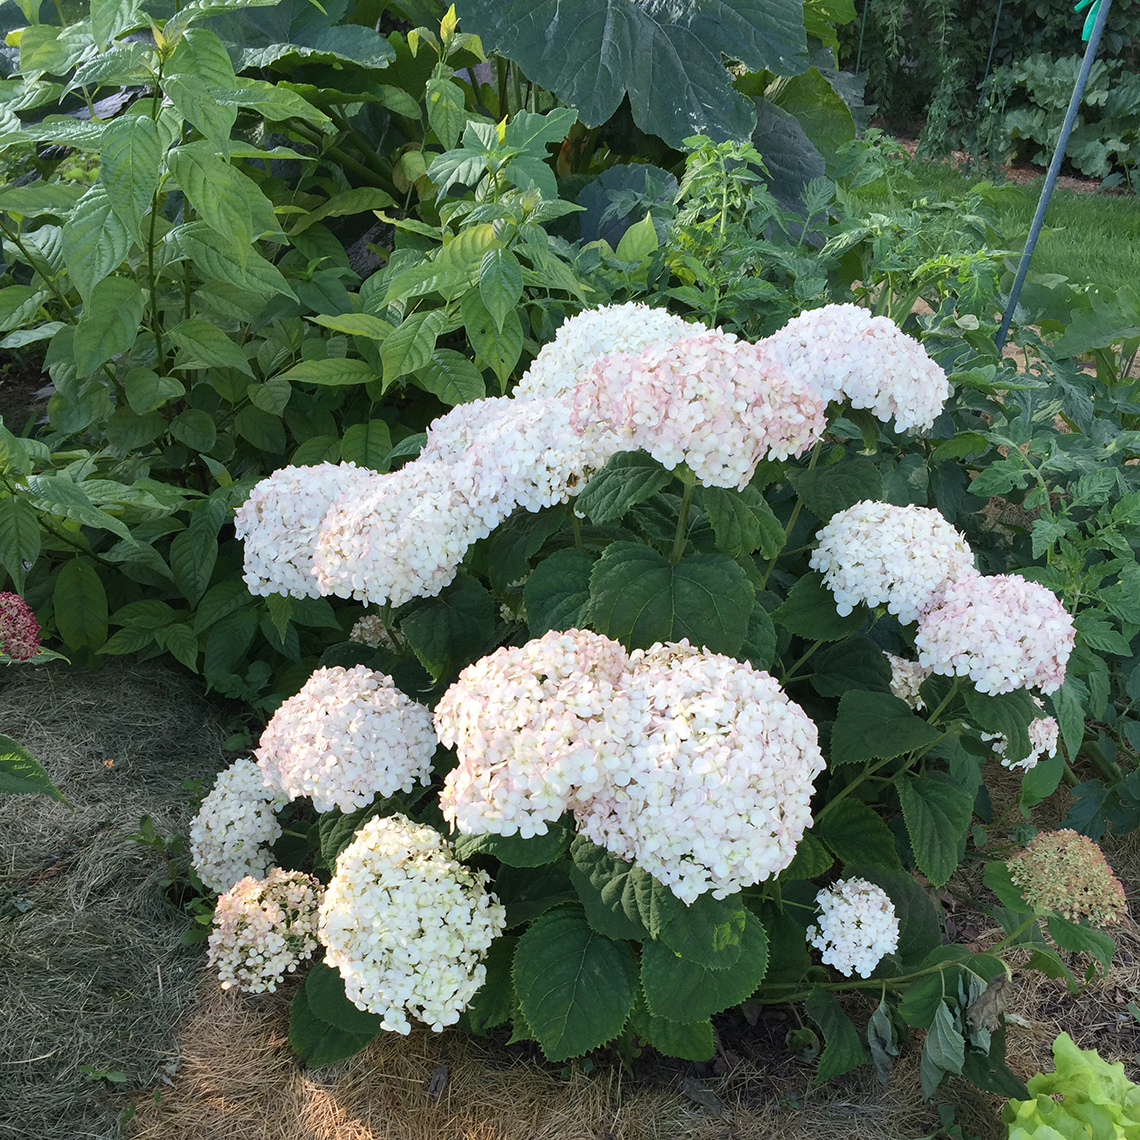 A specimen of Invincibelle Wee White hydrangea blooming in a vegetable garden